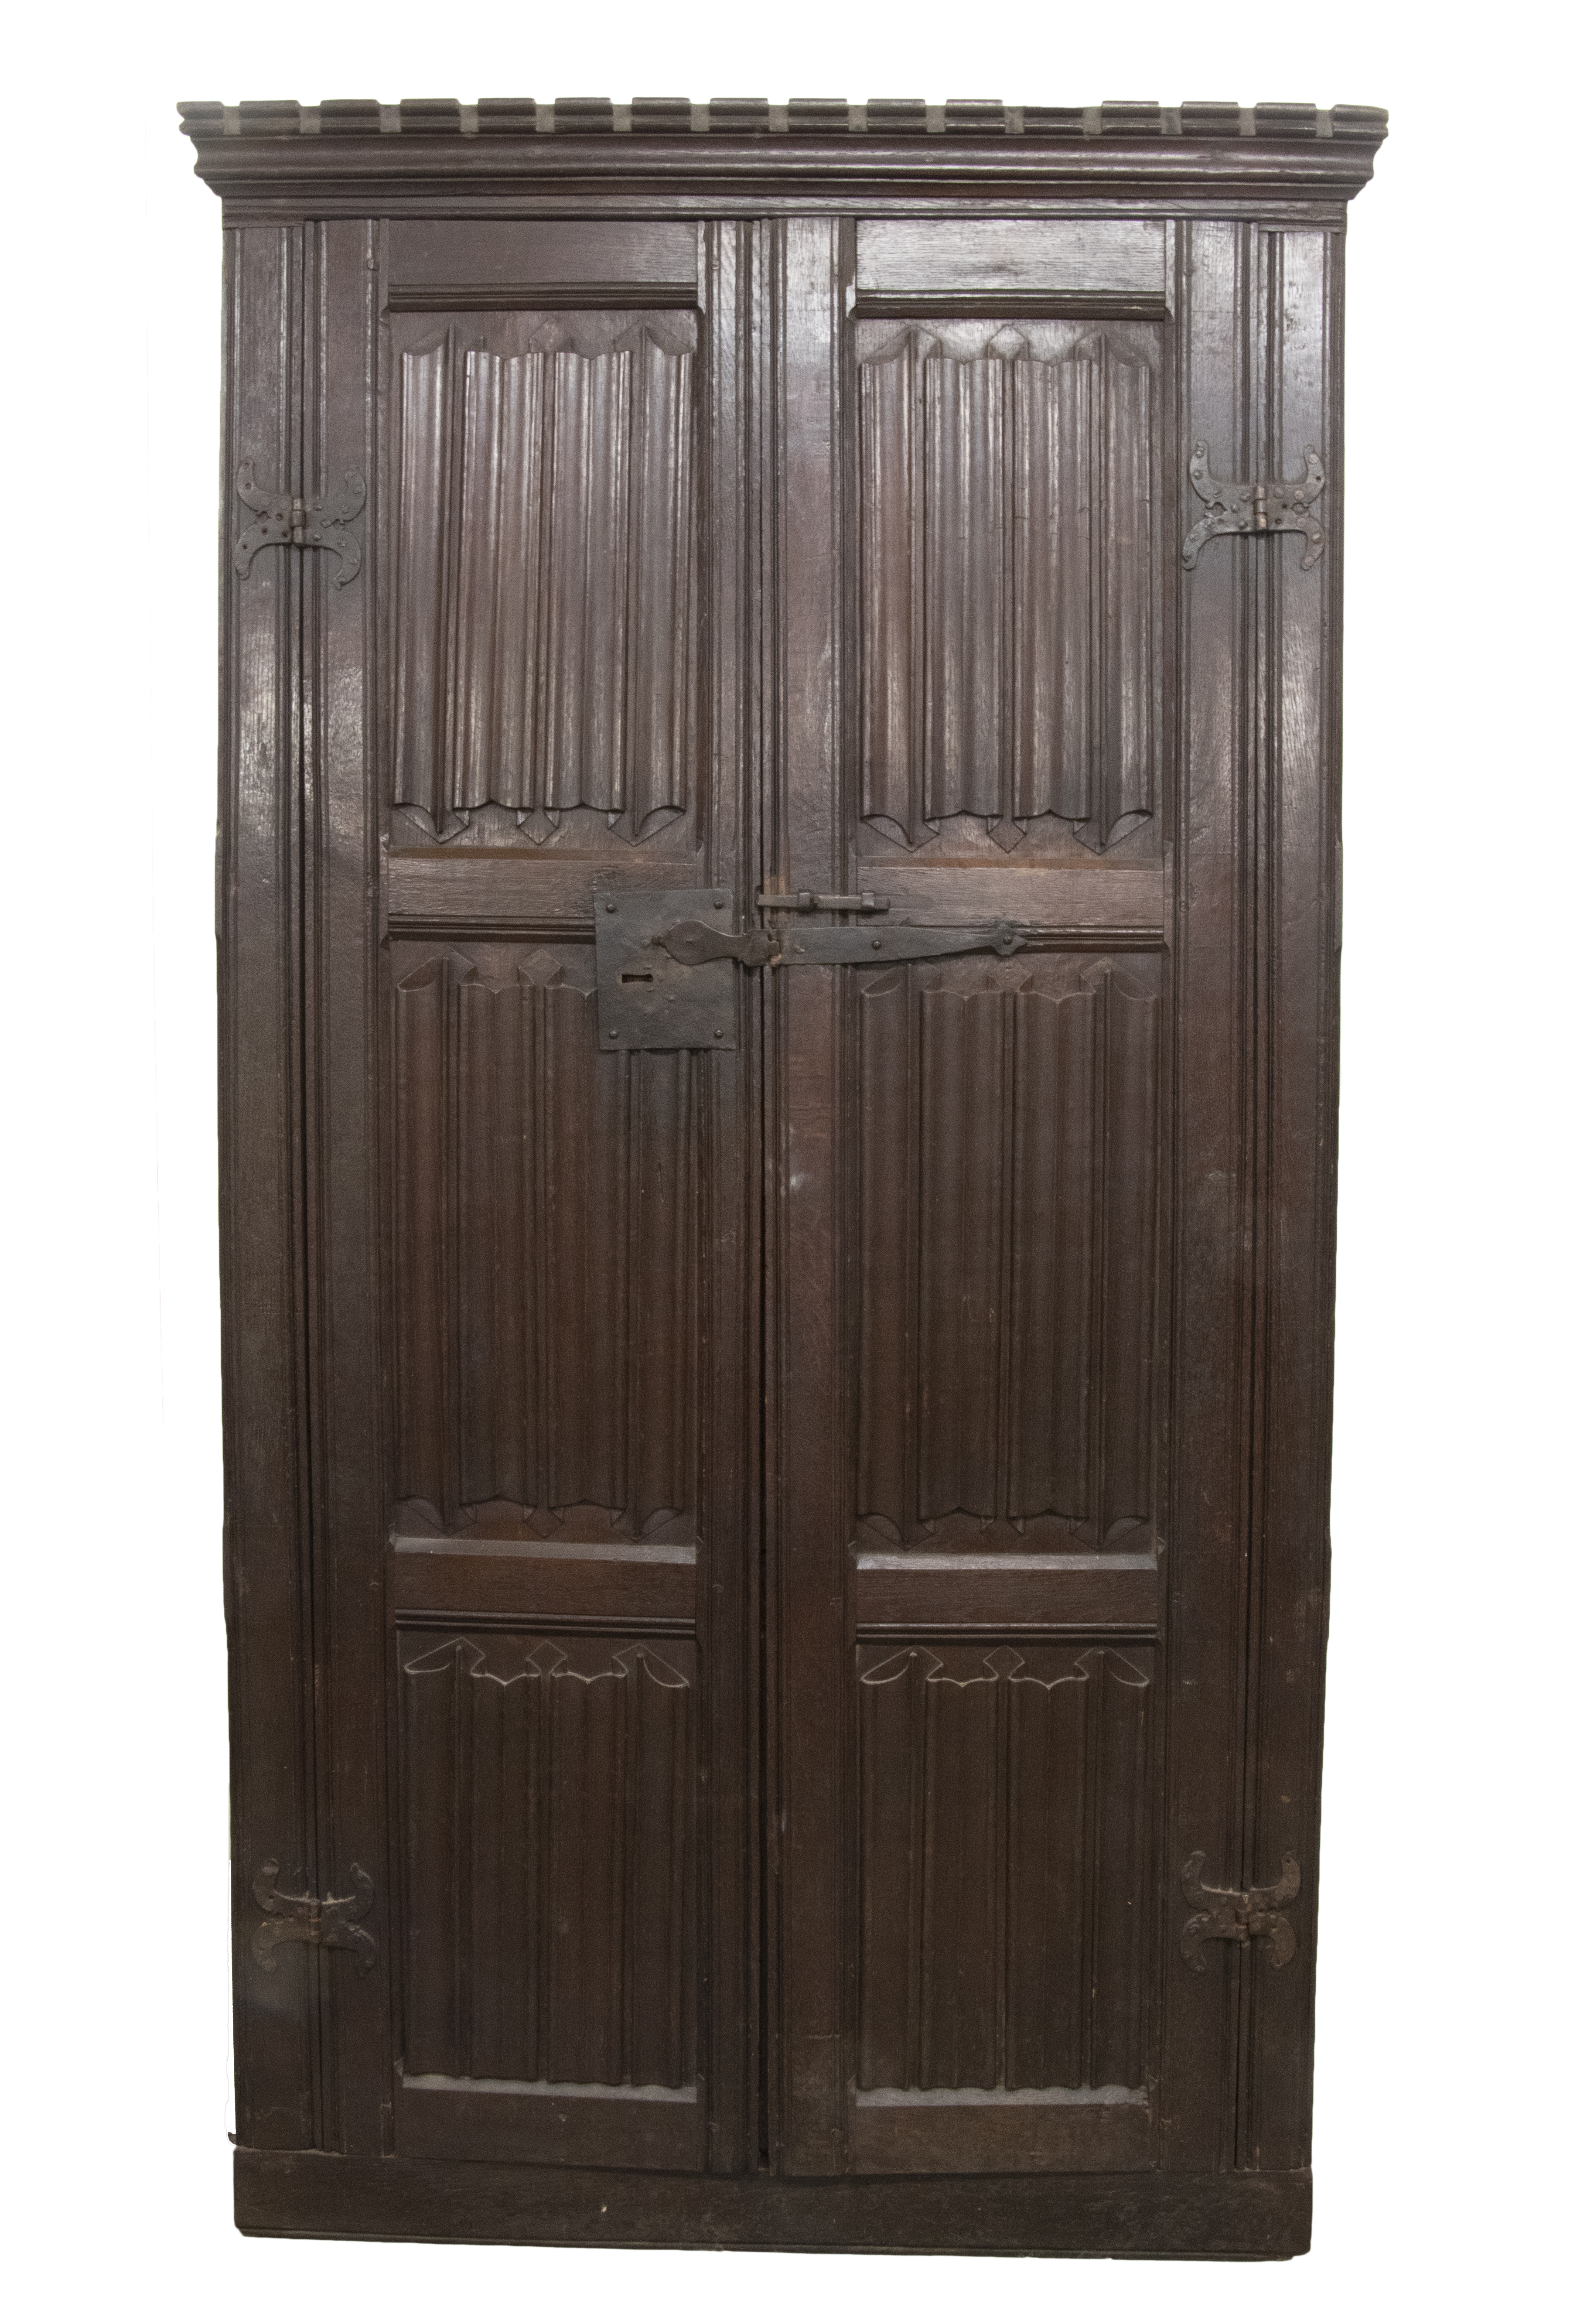 EARLY ENGLISH CARVED CUPBOARD DOORS 2b3cb4